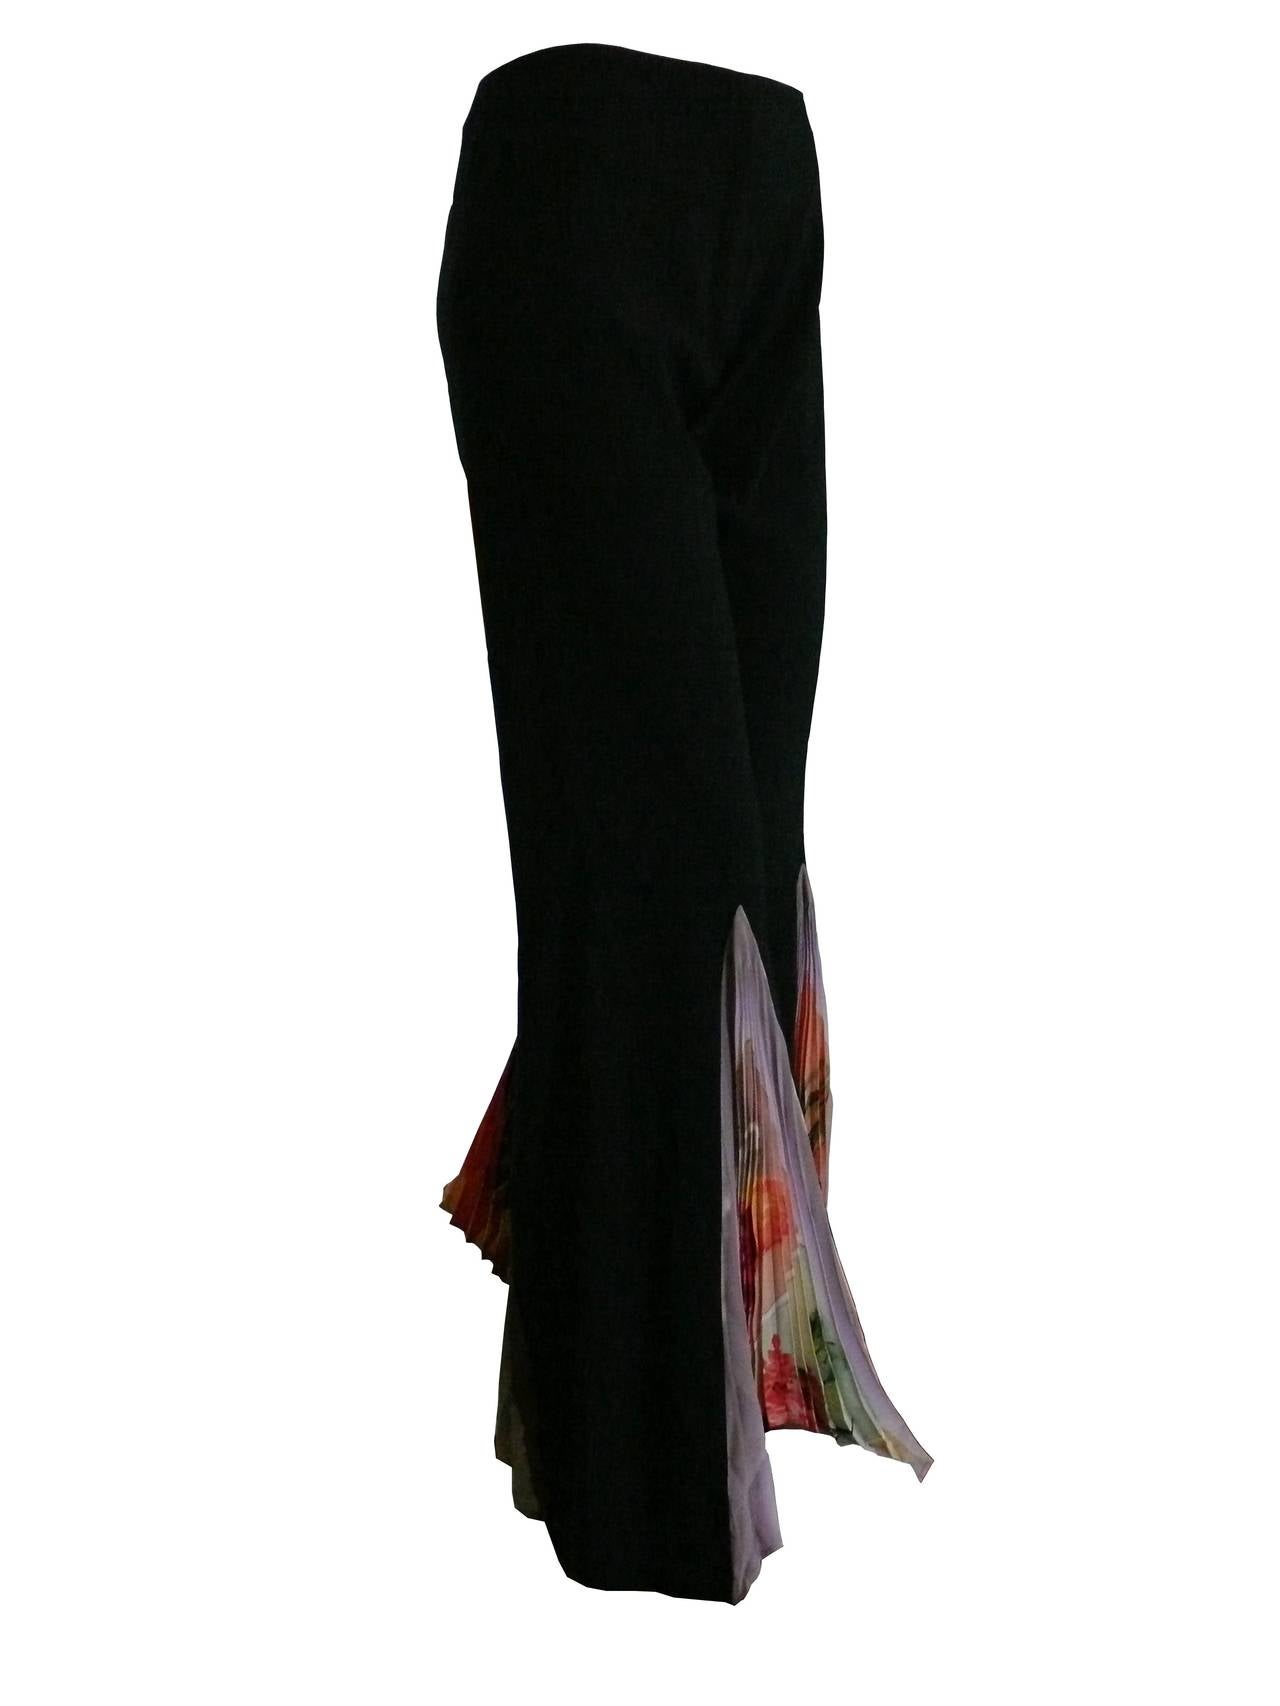 JEAN PAUL GAULTIER gorgeous formal black pants featuring wide, flared legs with floral print plisse.

Label reads Jean Paul Gaultier Femme Made in Italy.
Size, composition and care labels.

Indicated sizes : I 40 - D 36 - F 36 - GB 8 - USA